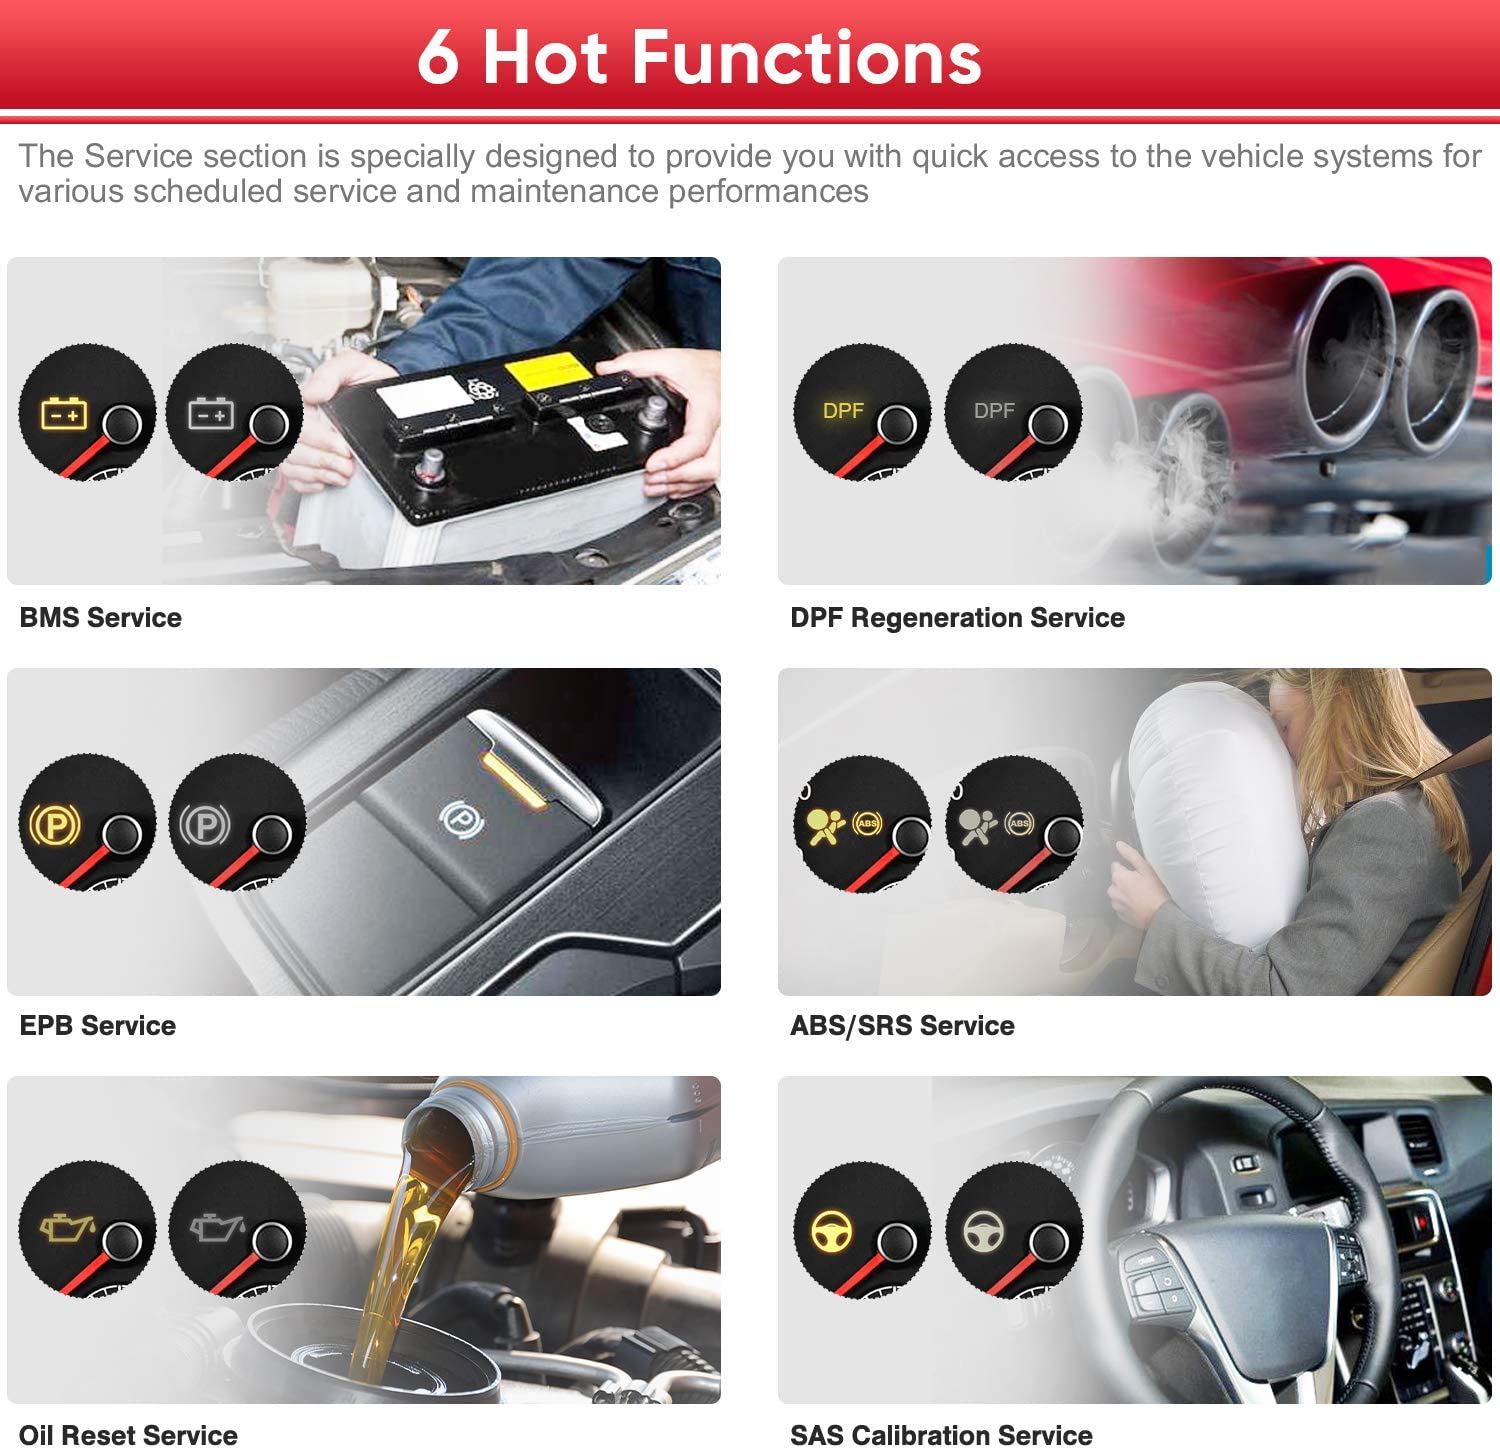 Specially designed to provide you with quick access to the vehicle system